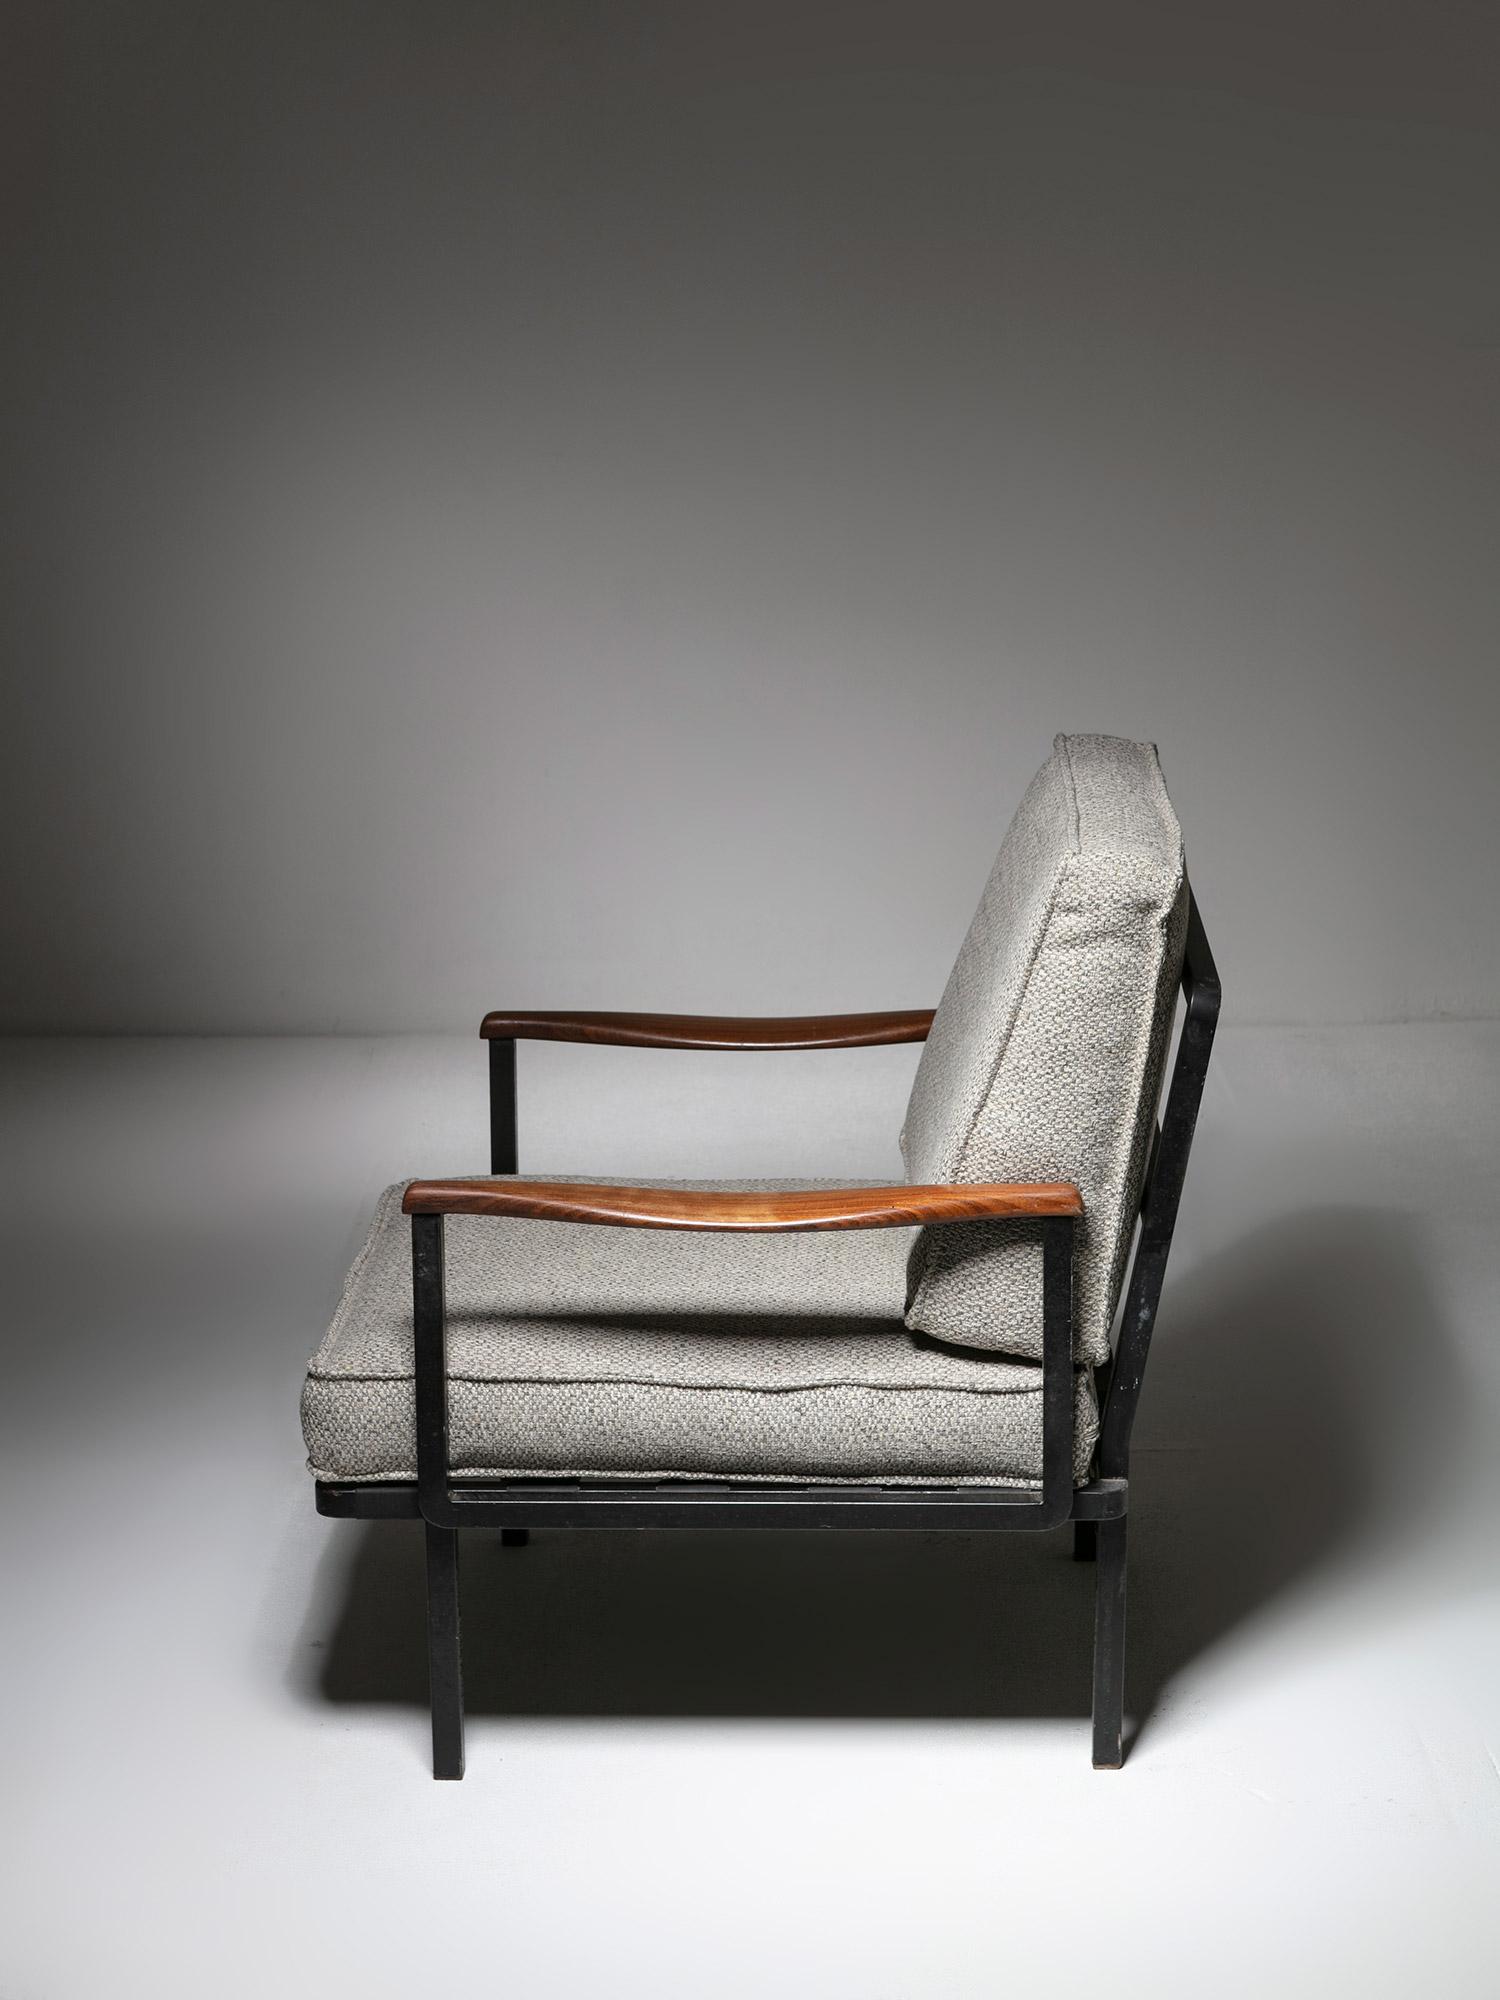 Rare Pair of Lounge Chairs Model P24 by Osvaldo Borsani for Tecno, Italy, 1960s For Sale 2